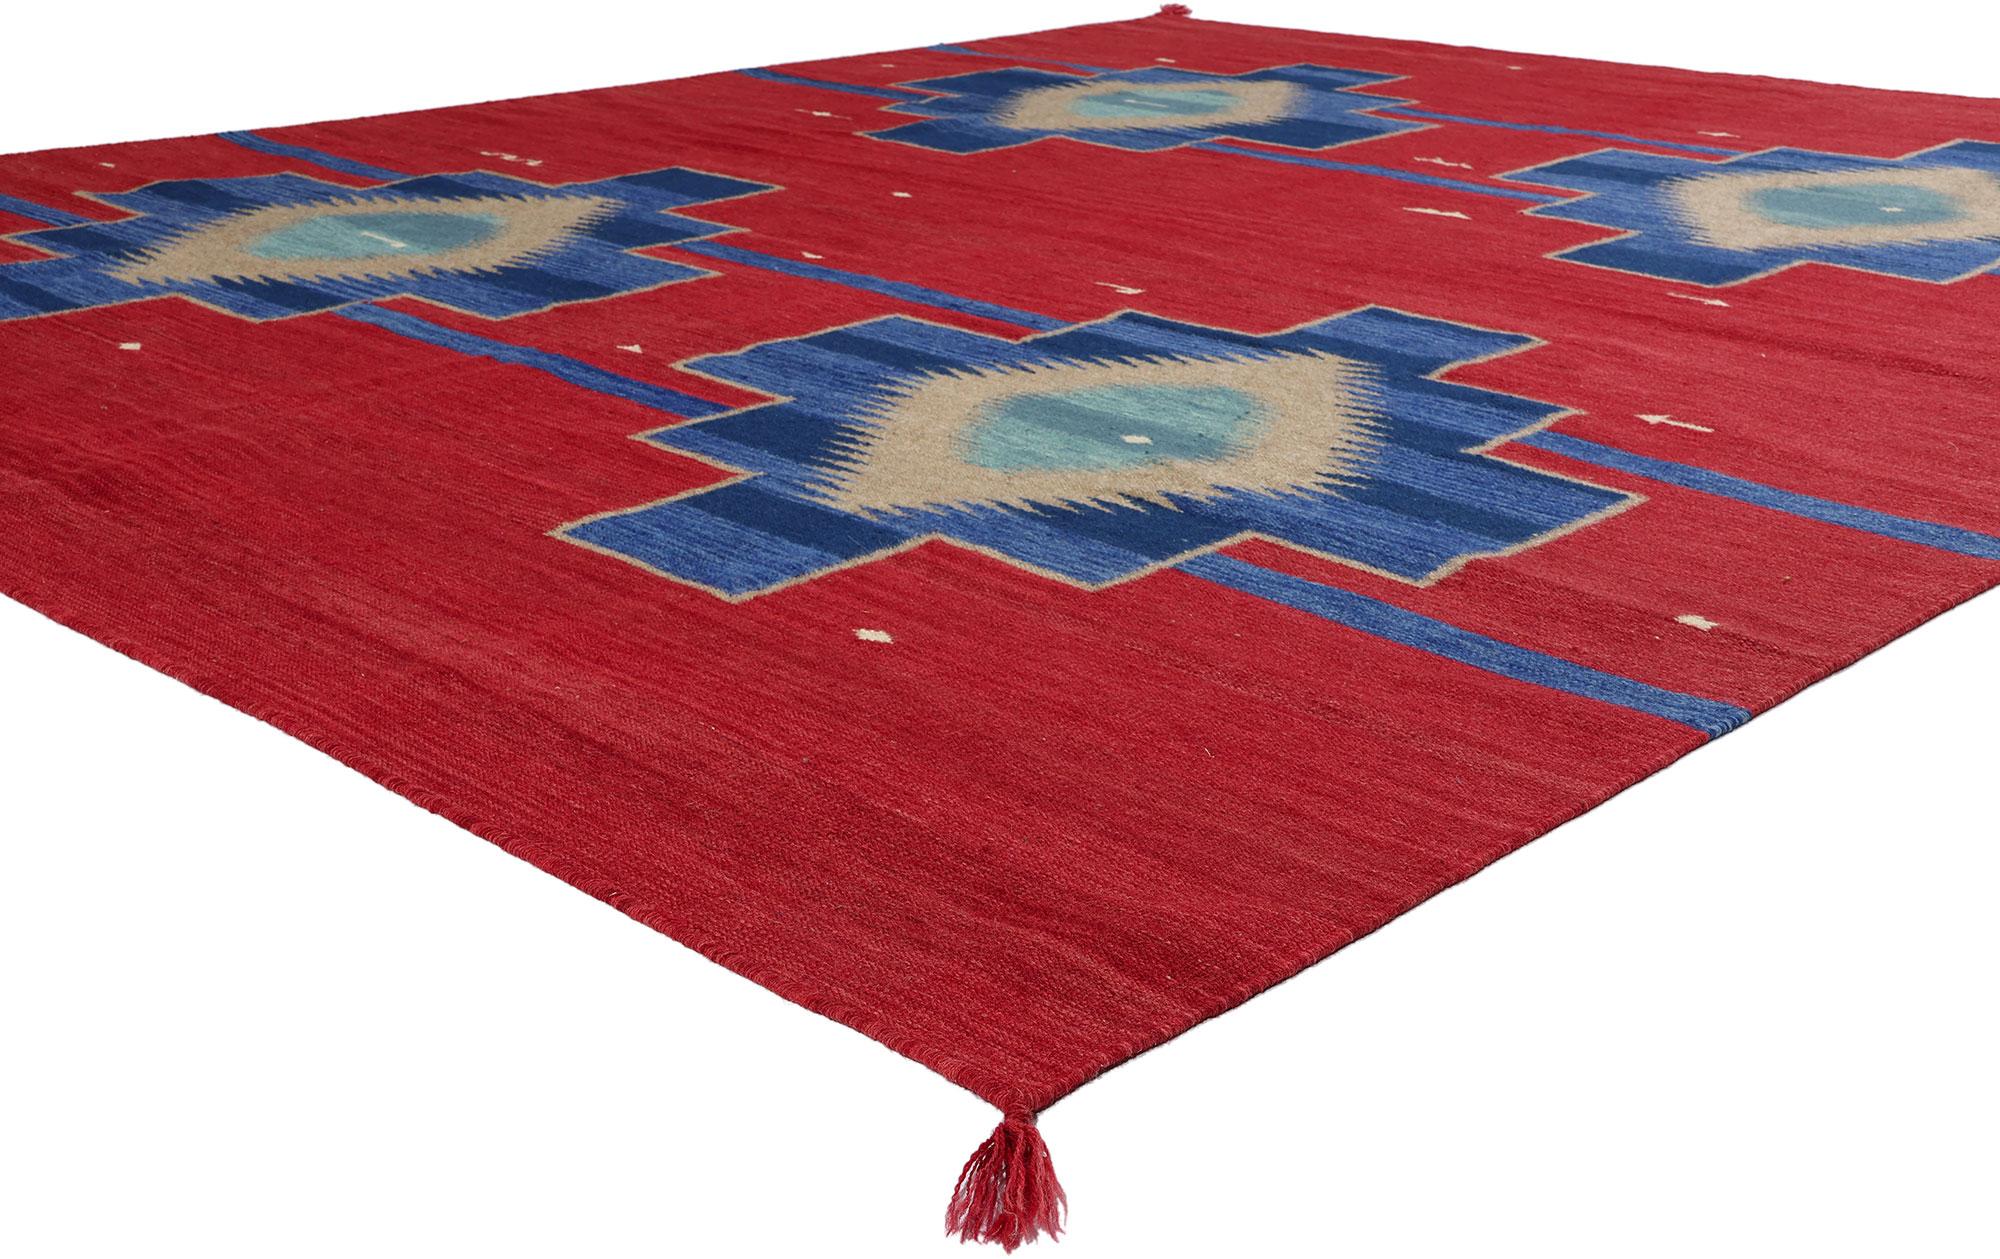 81040 Southwest Modern Red Ganado Navajo-Style Rug, 08'02 x 10'00. Elevate your living space with the vibrant allure of Southwest Modern aesthetics embodied in this meticulously handwoven wool Ganado Navajo-style rug. A modern marvel influenced by